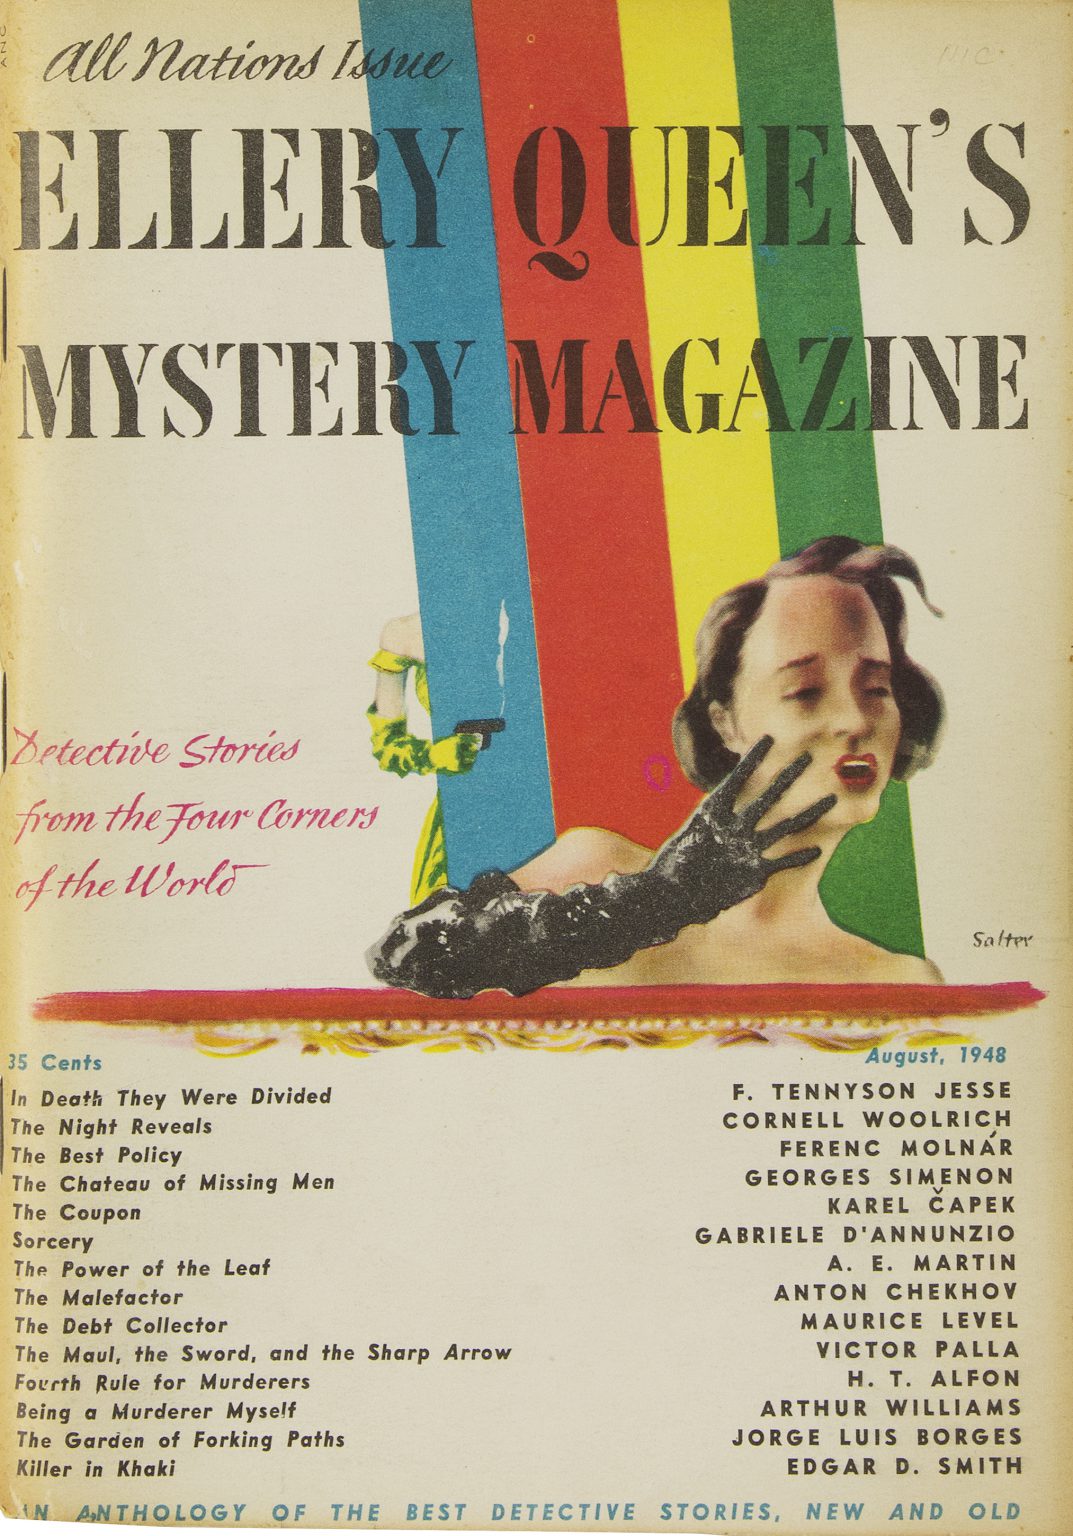 Ellery Queen’s Mystery Magazine, 1948. – TEMPORARY CULTURE